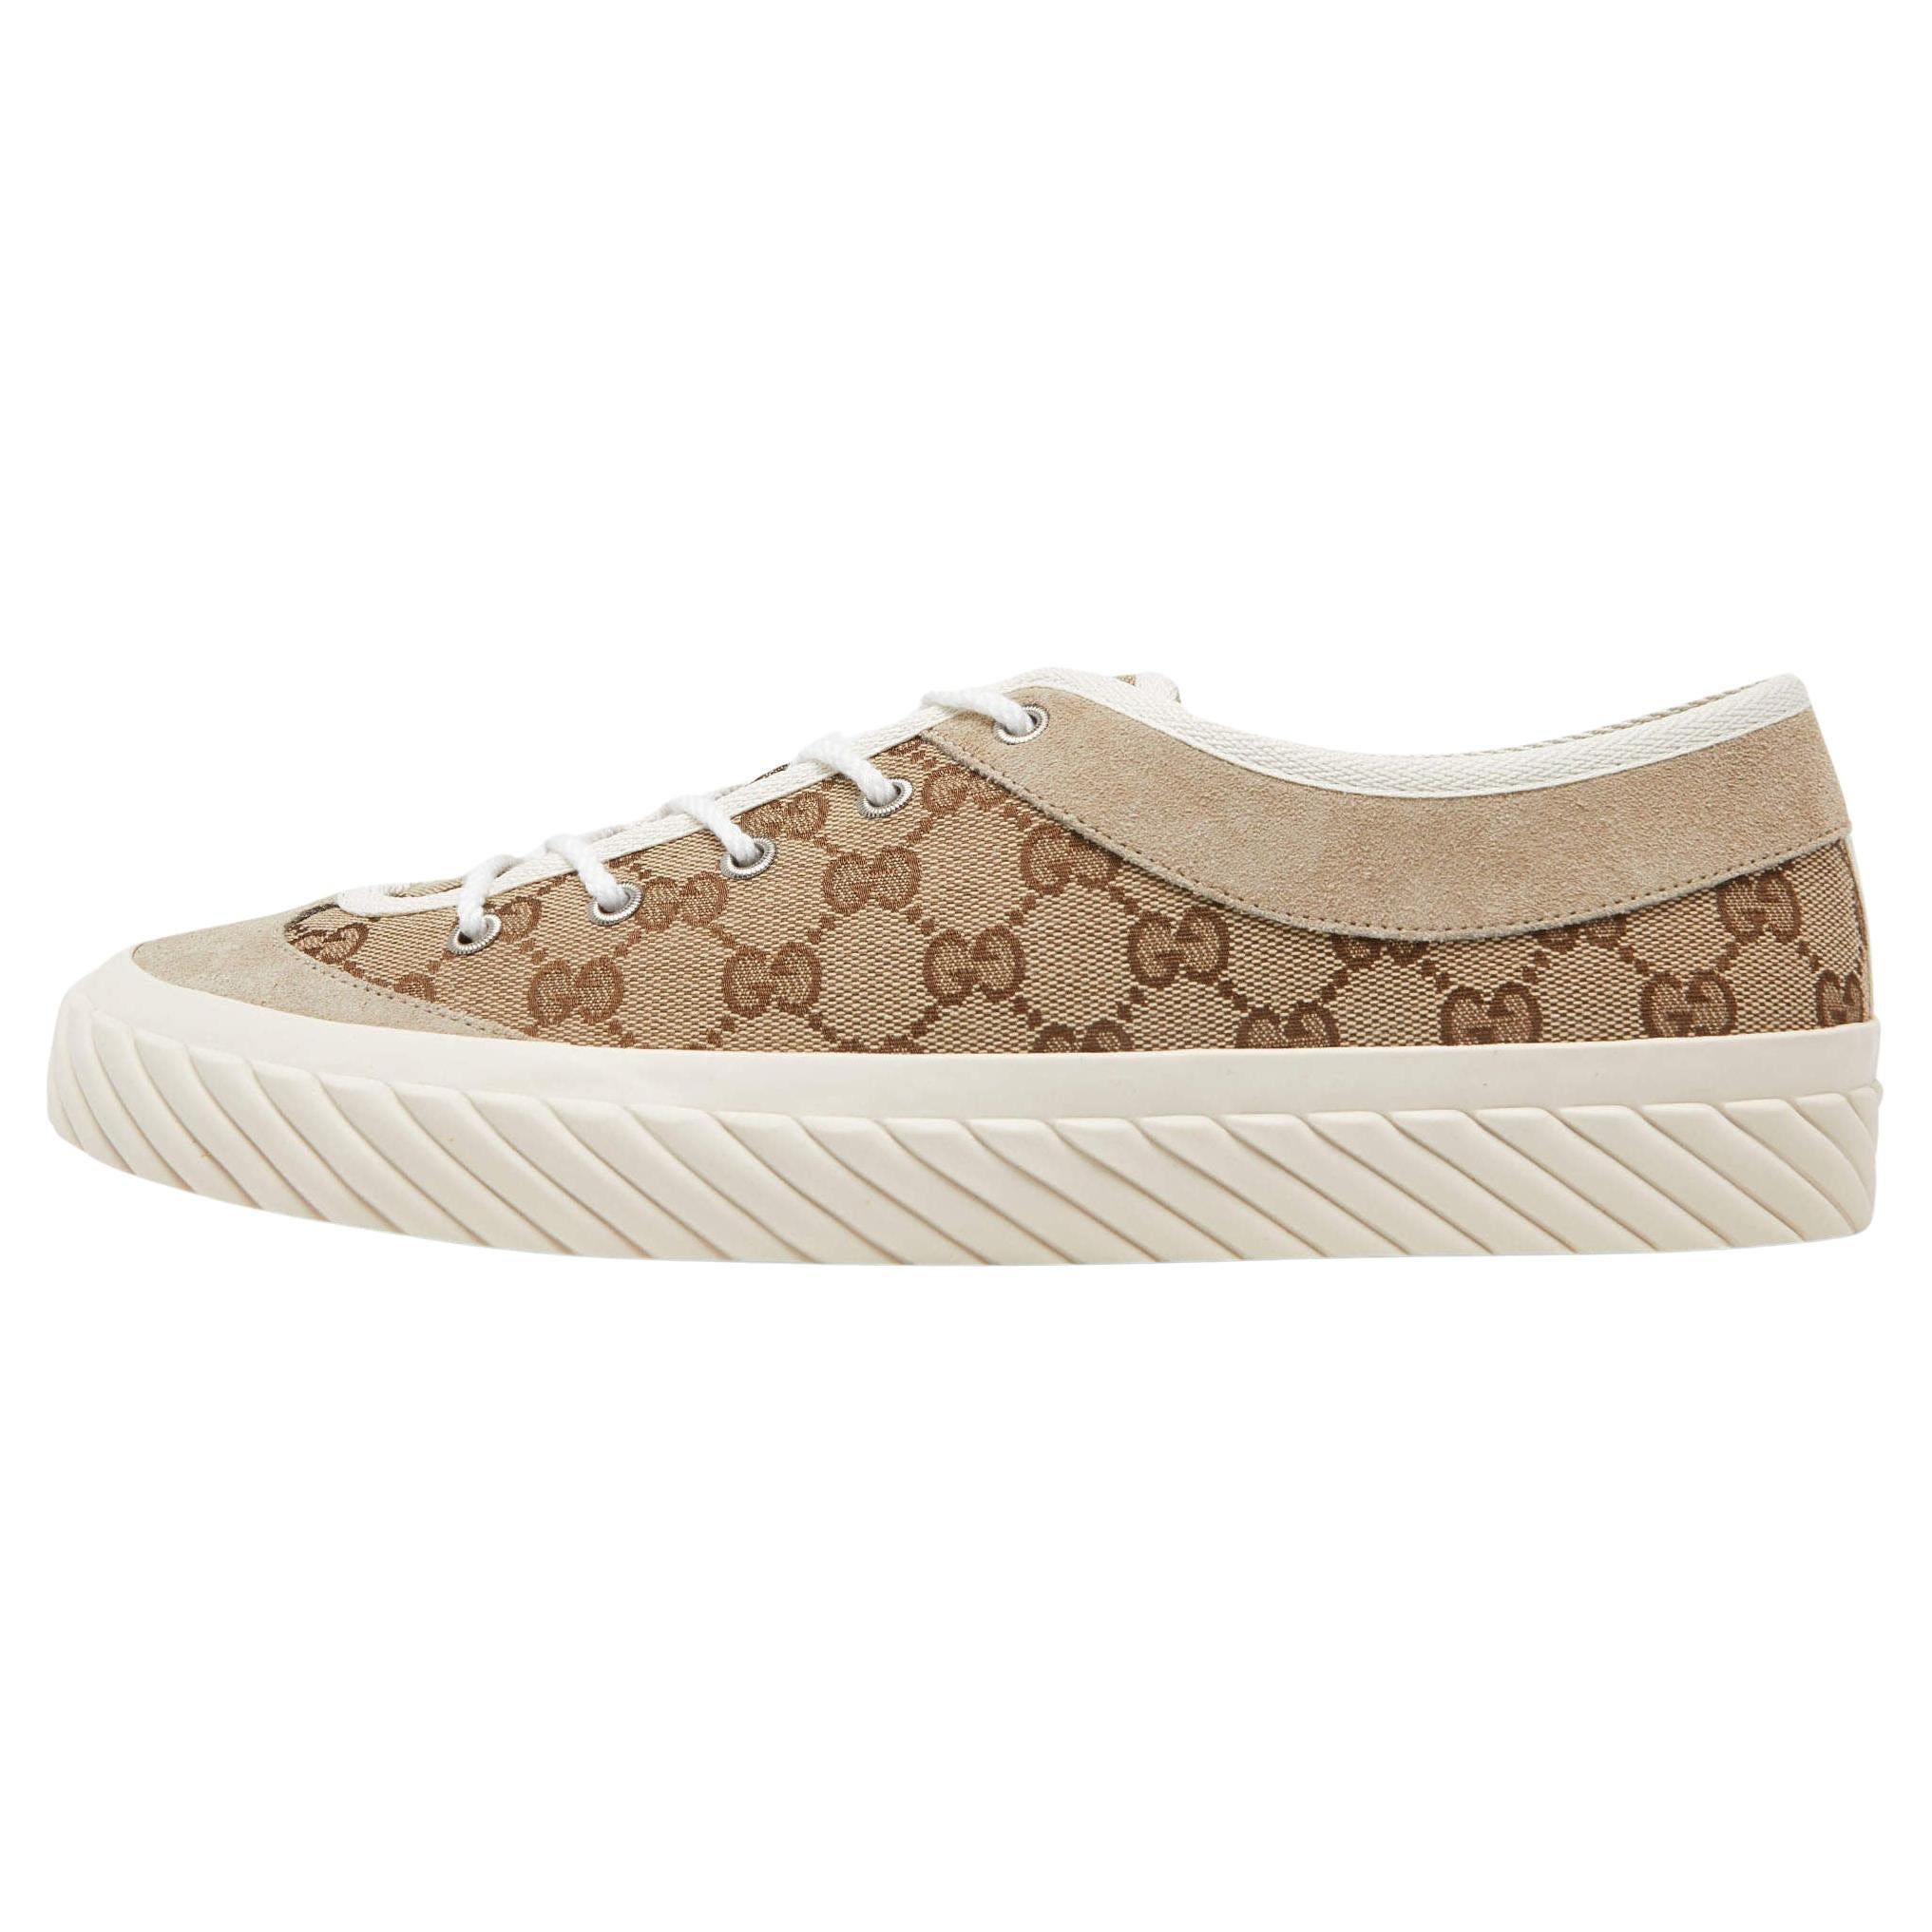 Gucci Gucci Brown/Beige GG Canvas and Suede Sneakers Size 43.5 For Sale